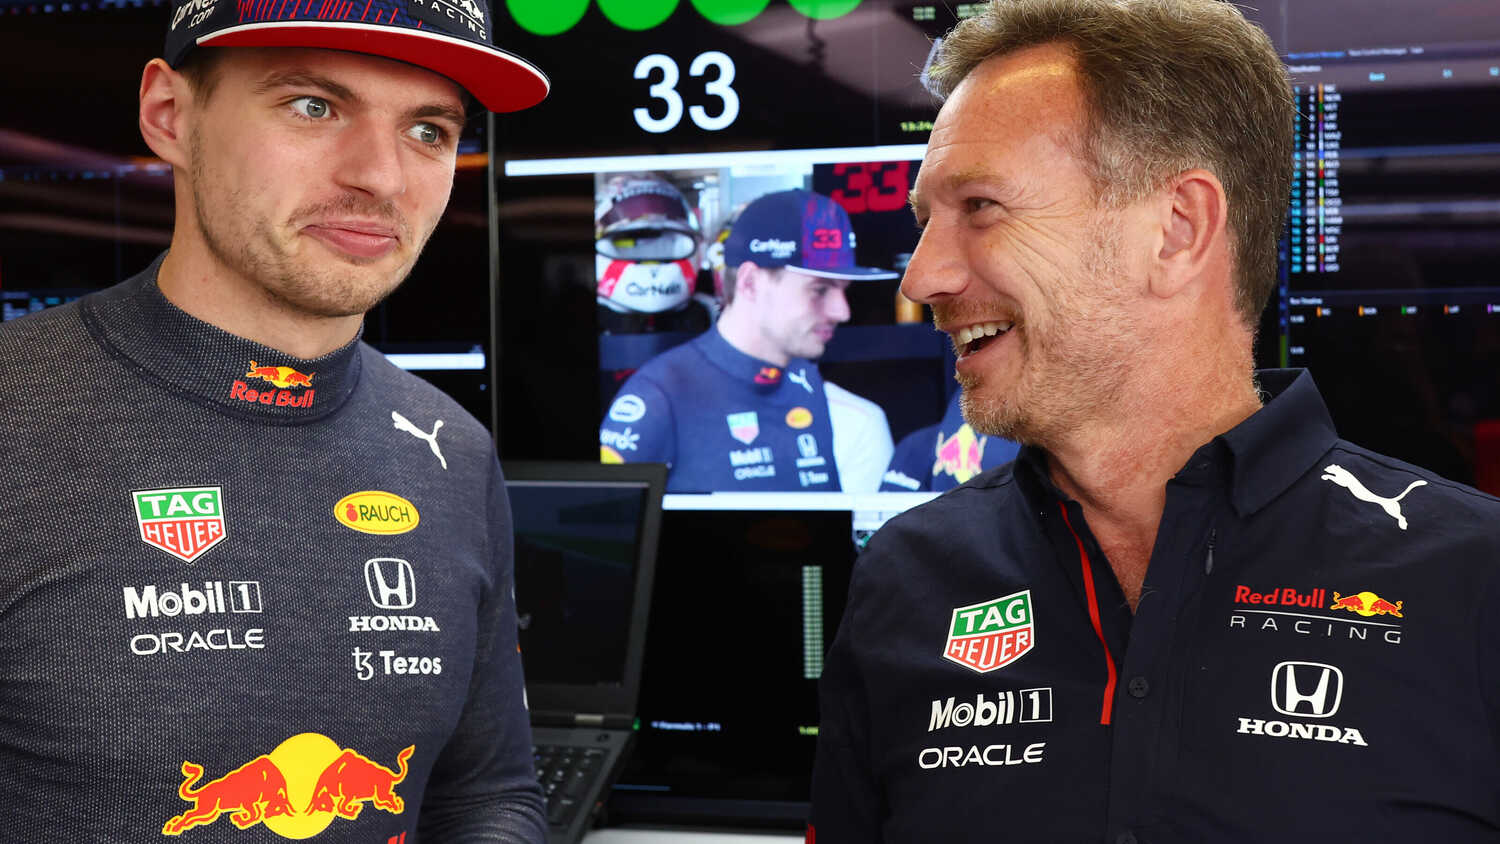 Red Bull has offered Verstappen a lucrative new contract